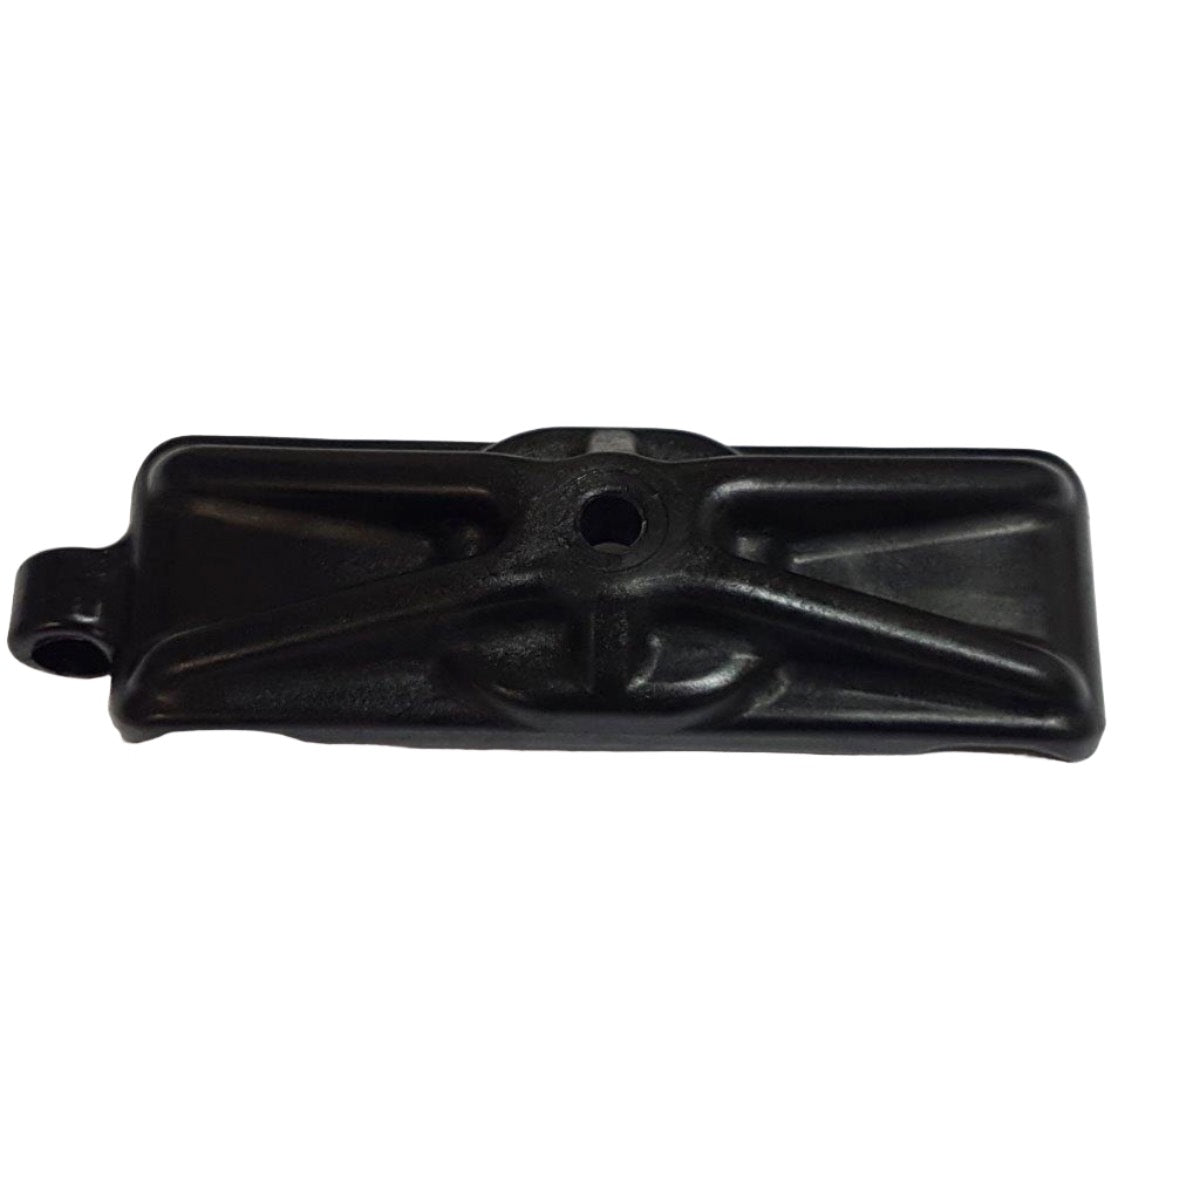 Kartech Fuel Tank Clamp For KG Type Tank